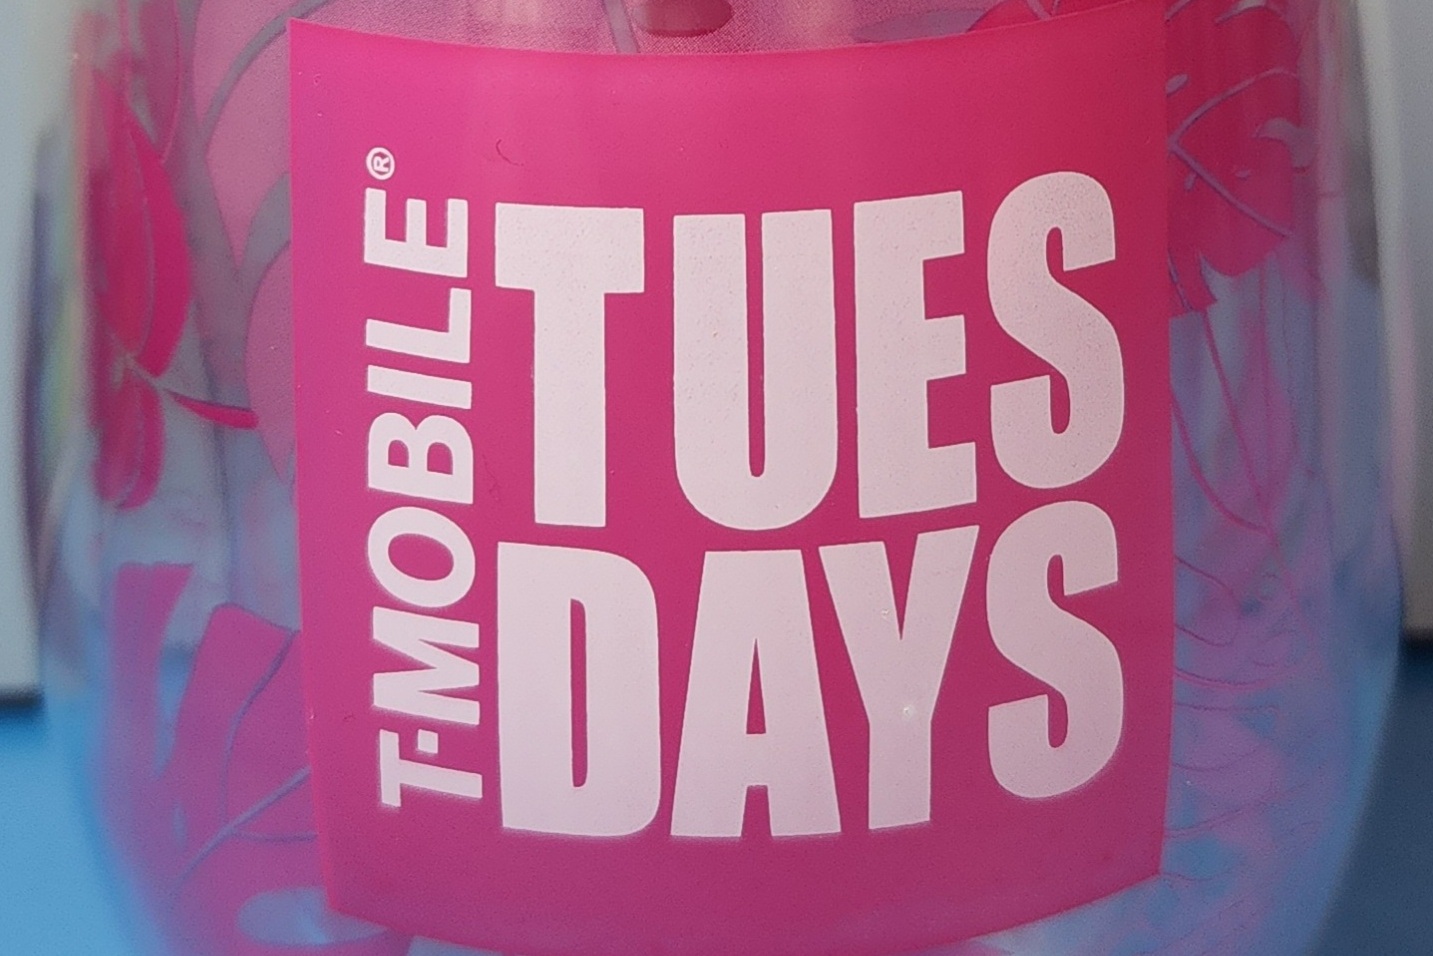 A New Free Physical Item Is Coming Soon For TMobile Customers